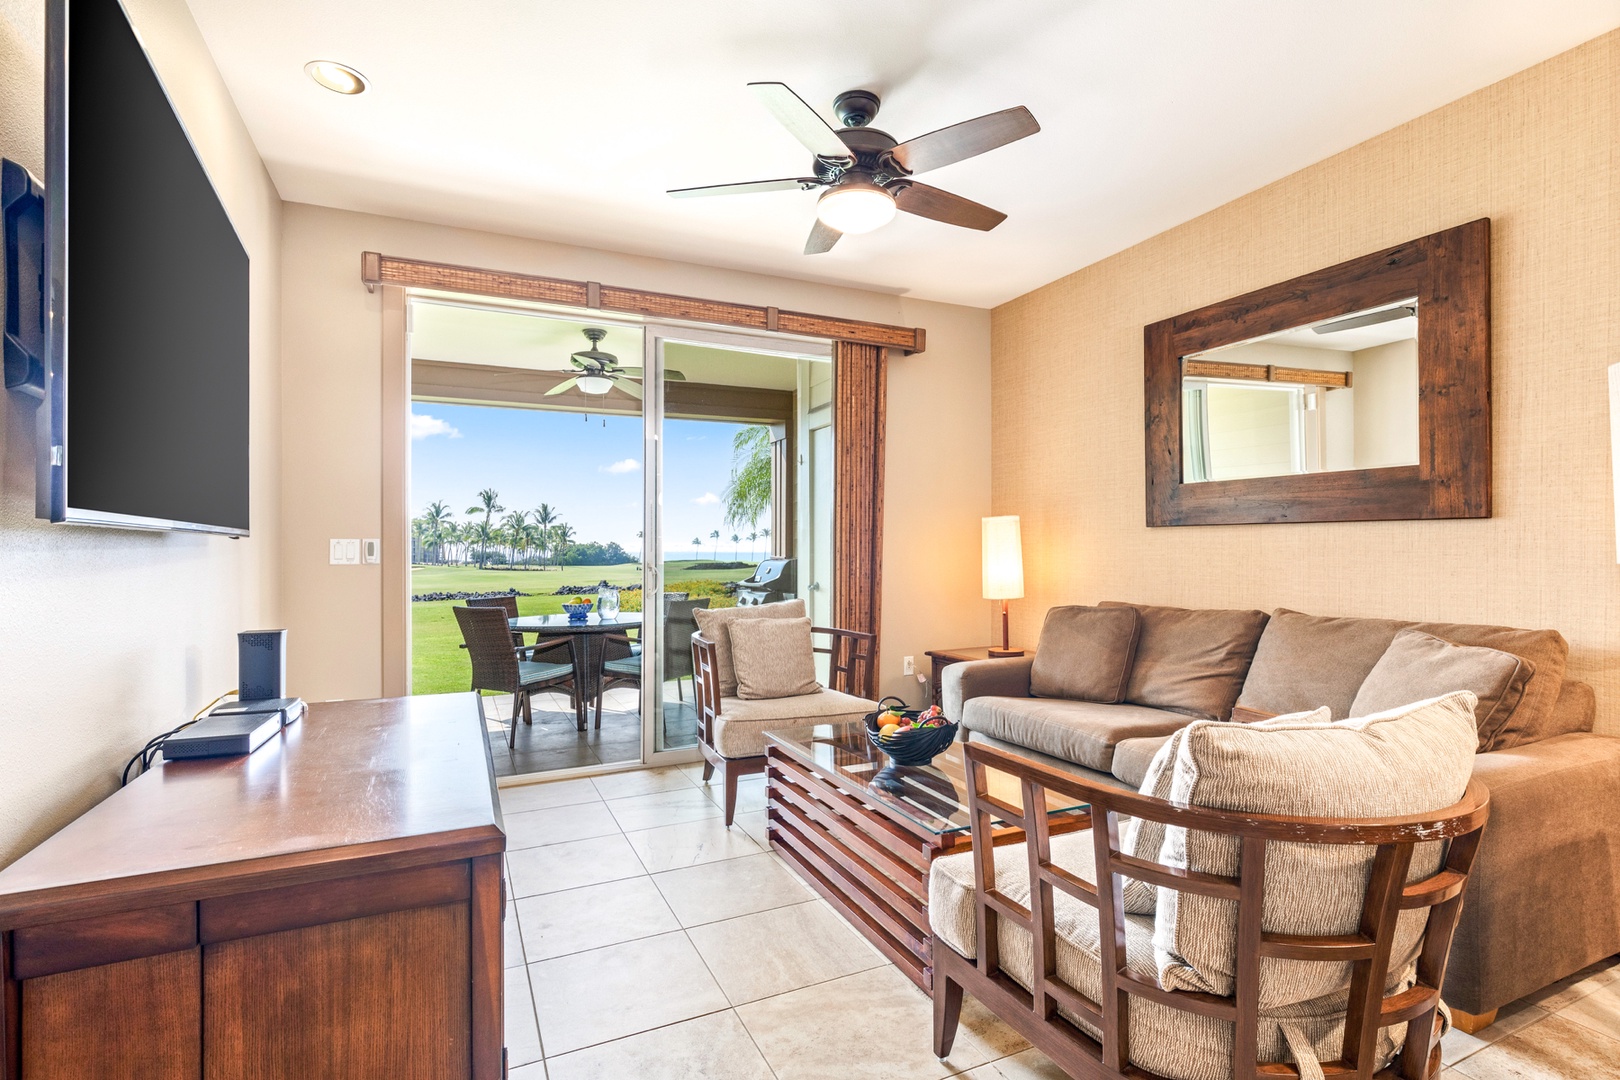 Waikoloa Vacation Rentals, 2BD Hali'i Kai (12C) at Waikoloa Resort - Closer view of living room seating. Sleeper sofa can accommodate up to 2 extra guests (must be approved and extra guest fees apply).